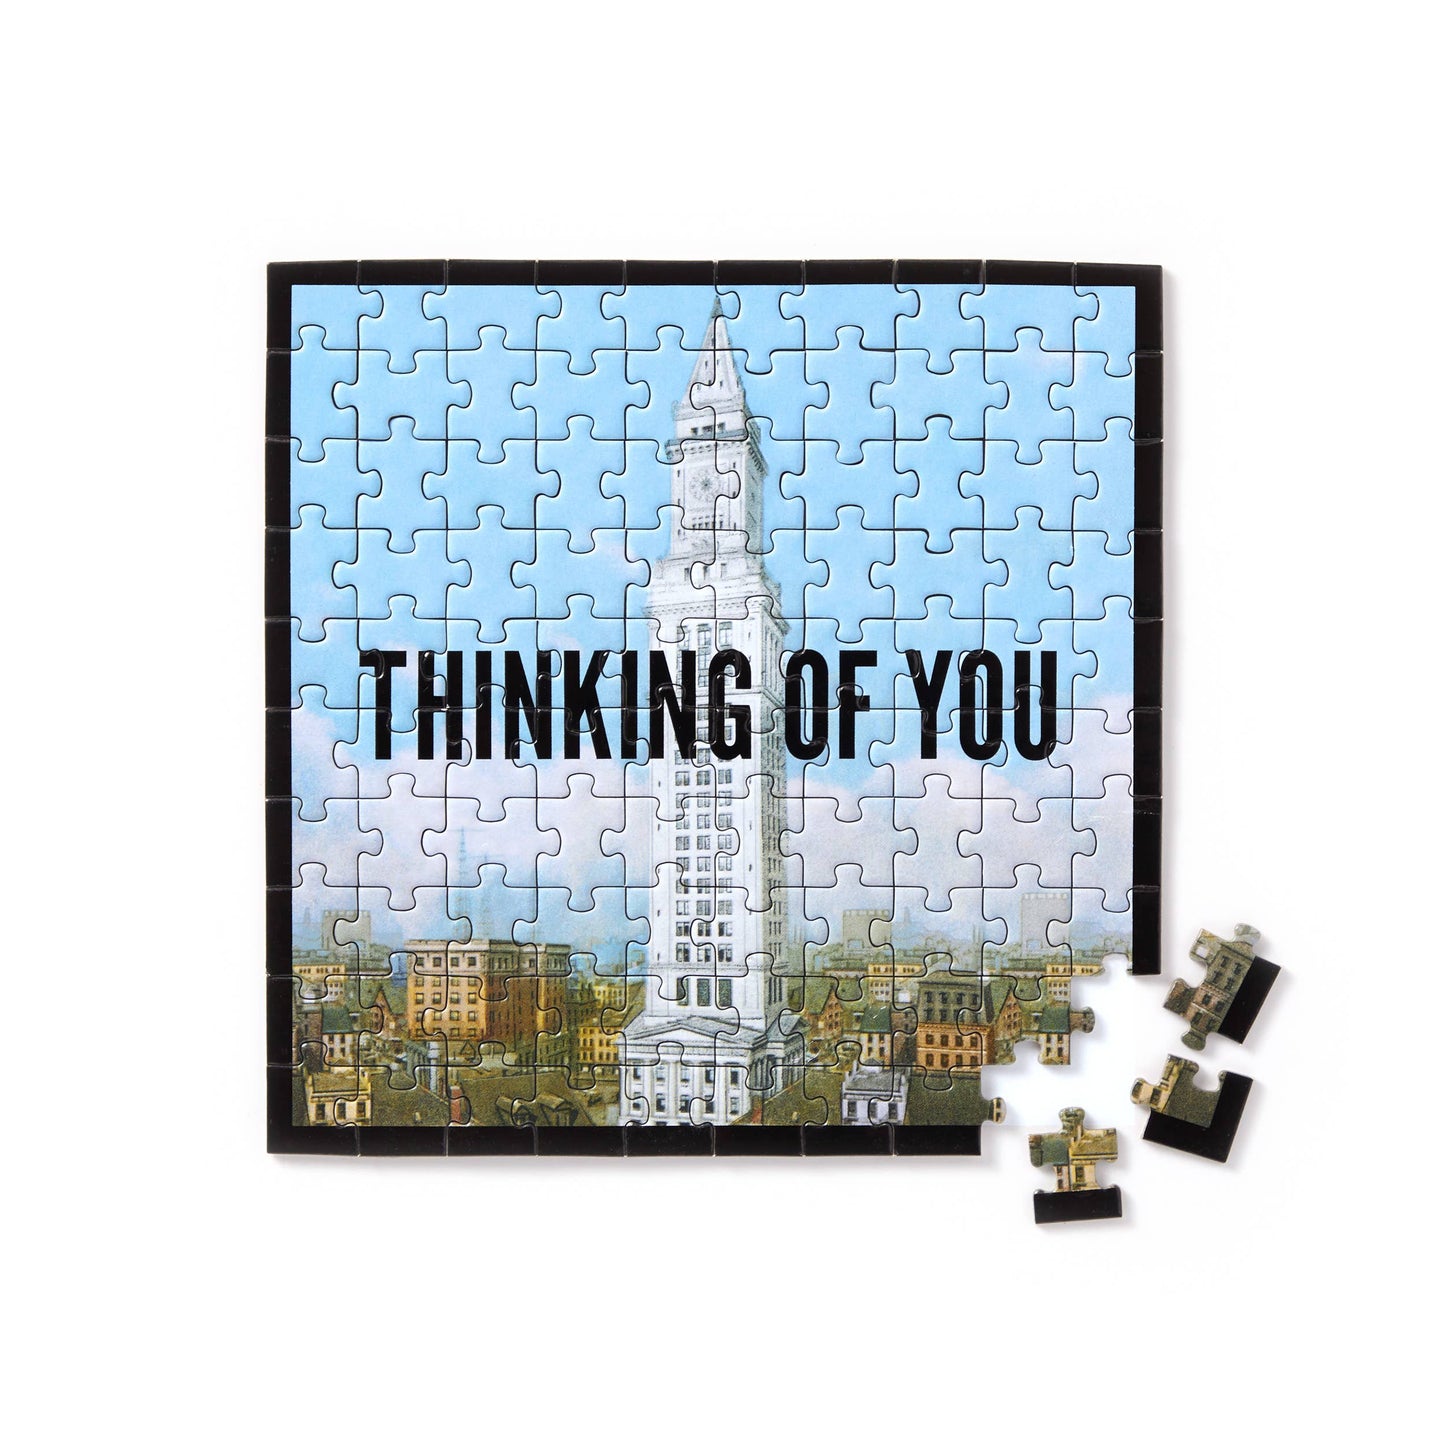 Thinking Of You 100 Piece Mini Shaped Puzzle